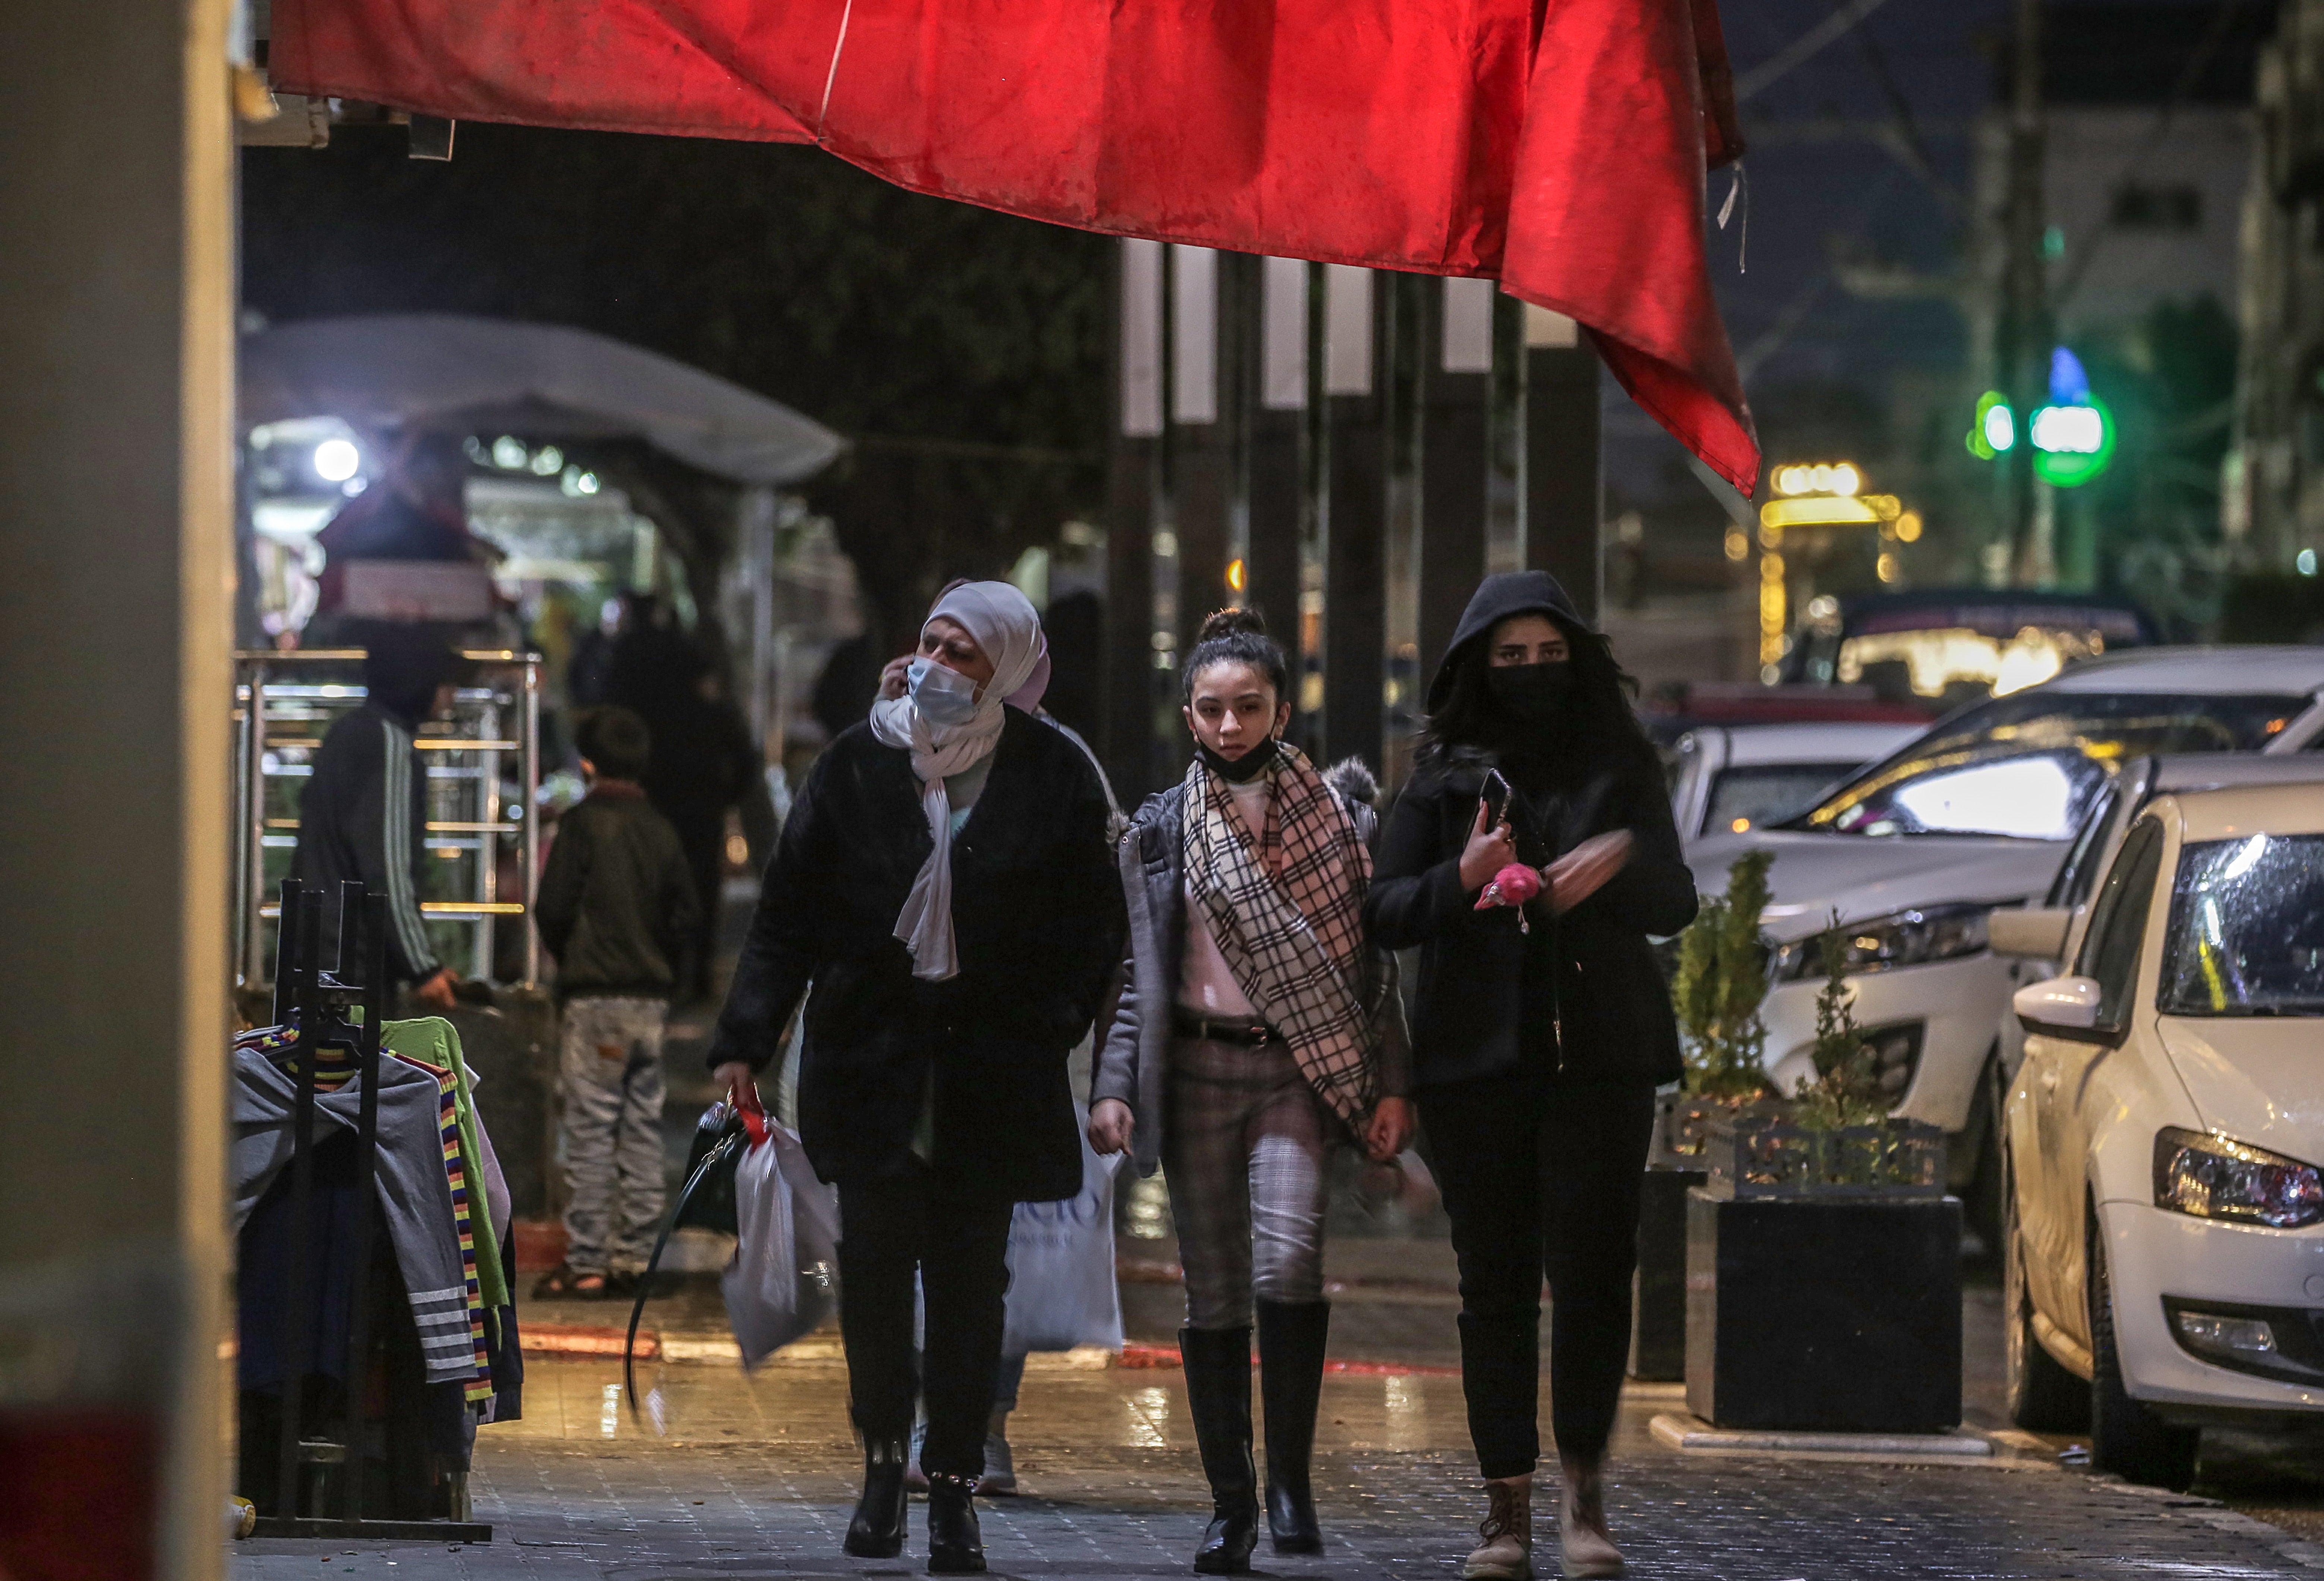 Palestinians wearing protective face masks amid the ongoing COVID-19 coronavirus pandemic in Gaza City